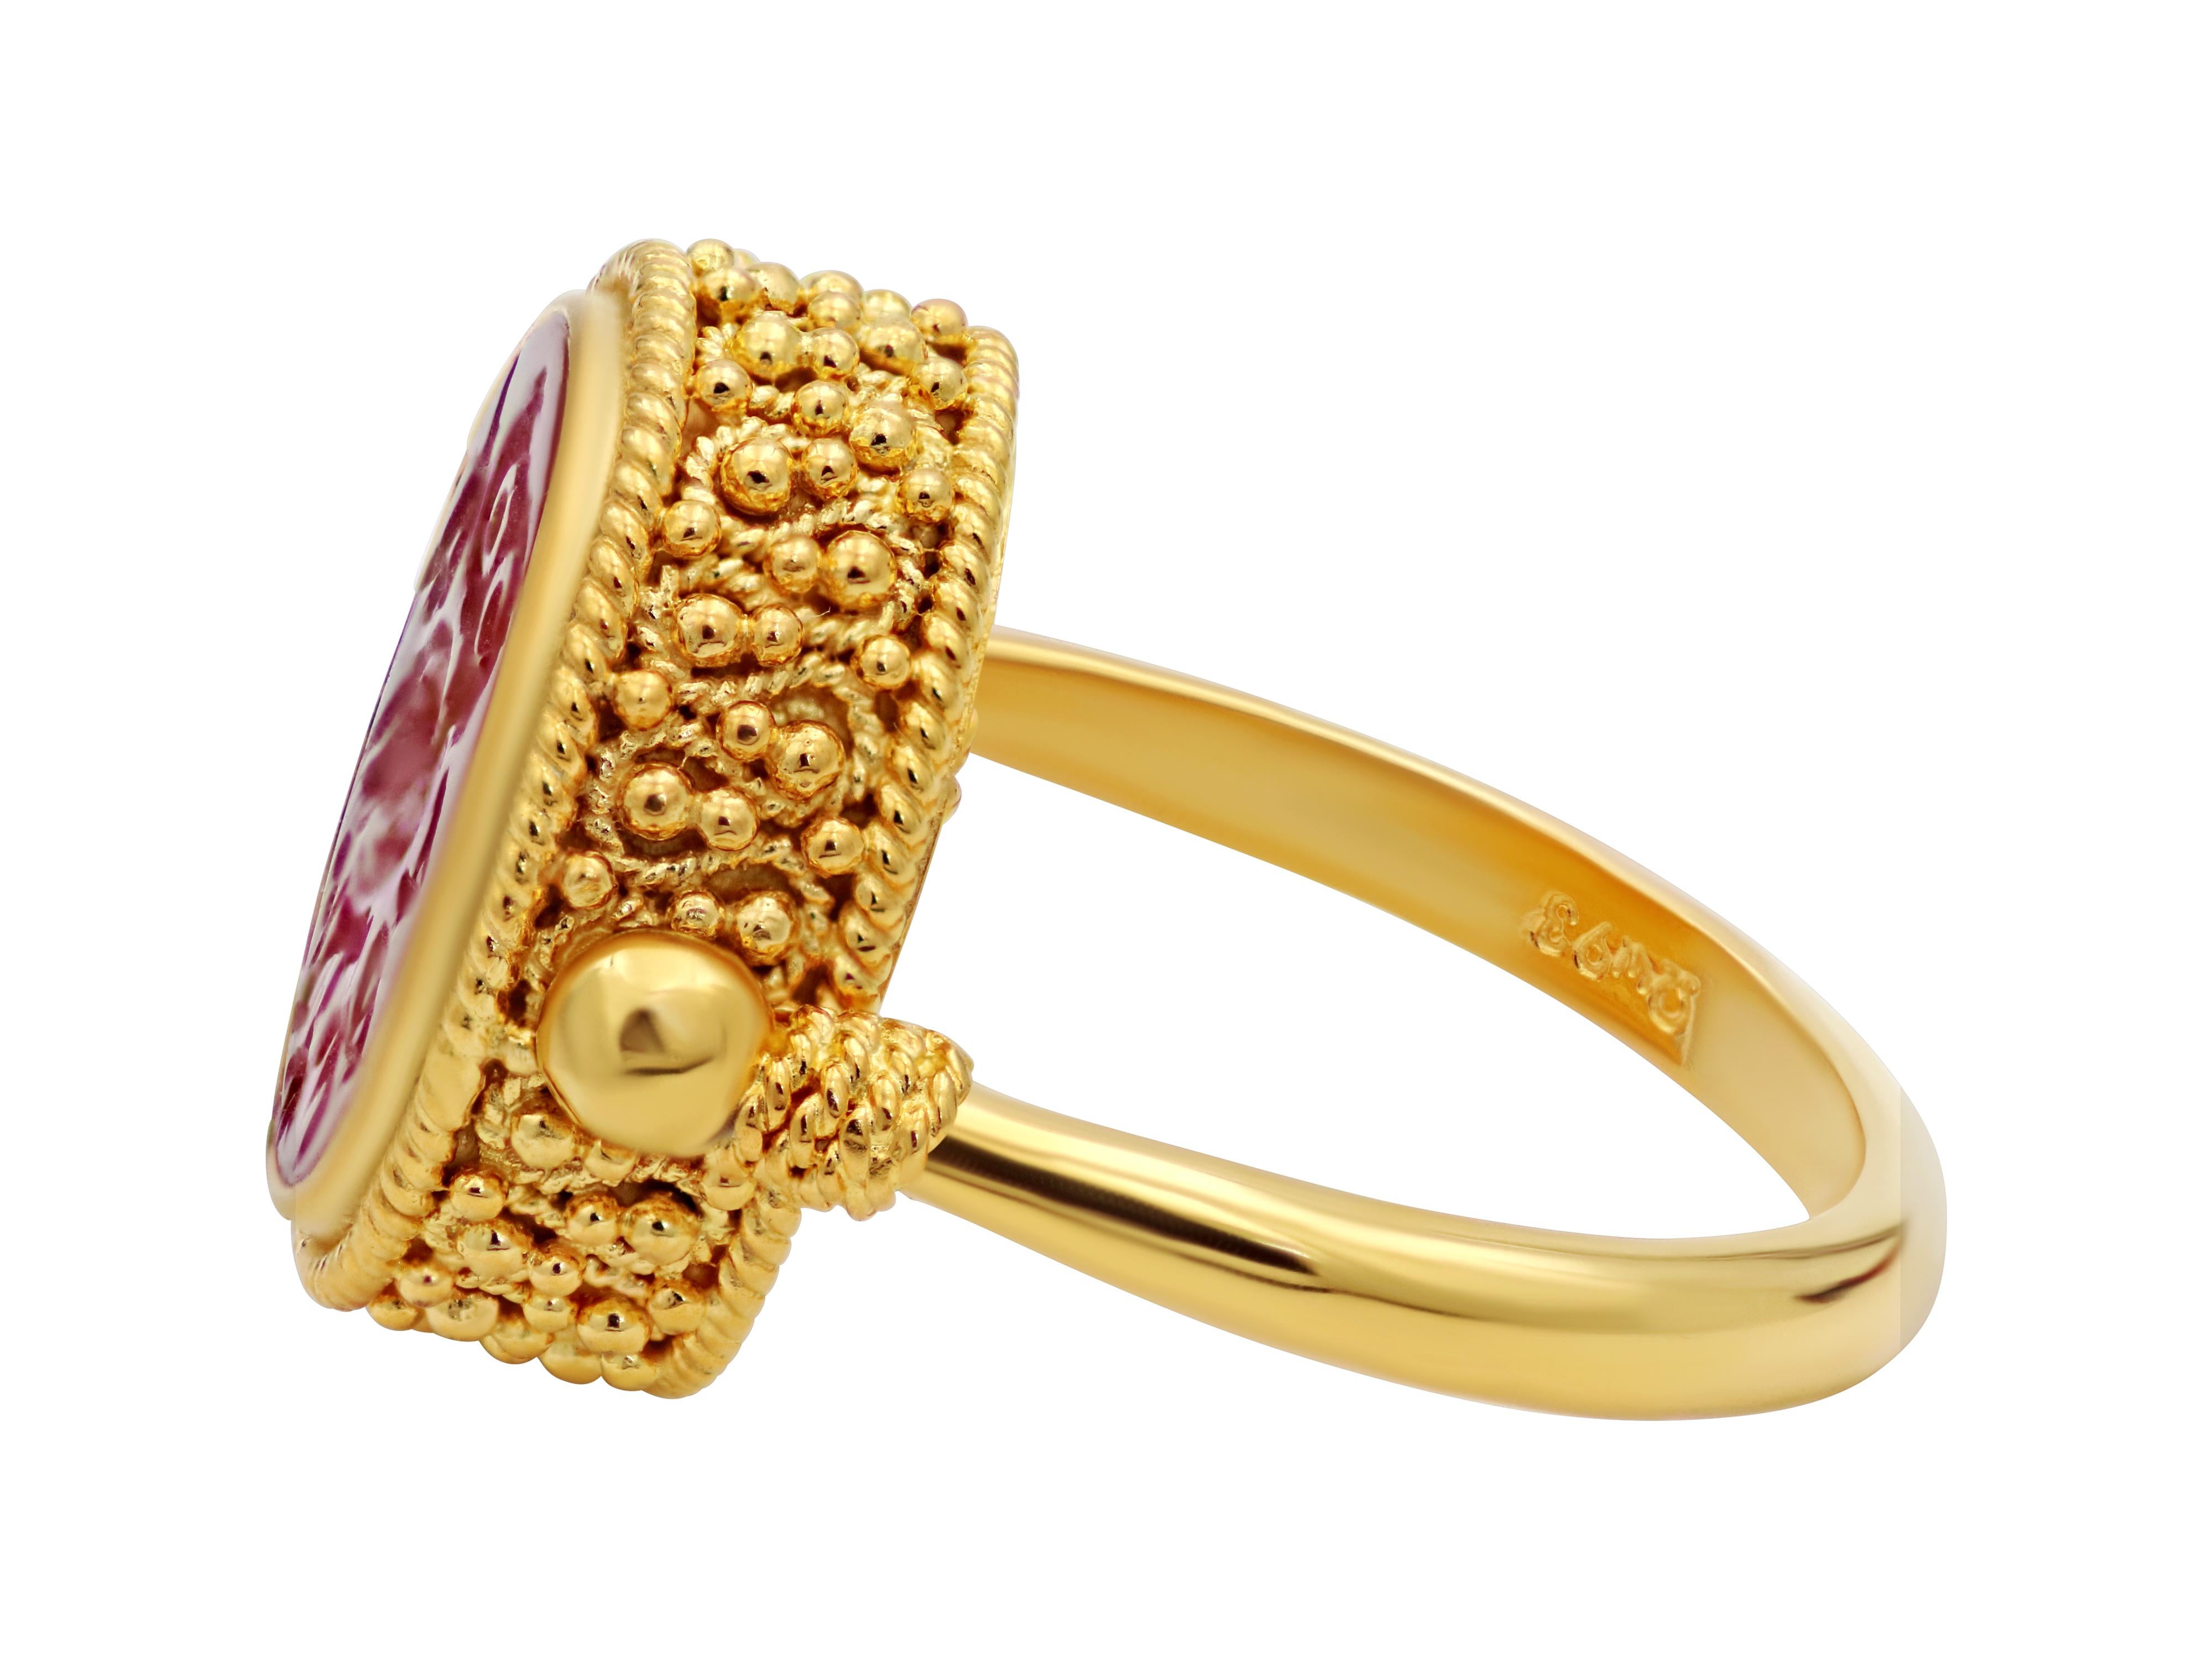 Reversible ring of 18k yellow gold and a natural cornelian made in museum replica and decorated with granulations and filigrees. The carnelian is hand carved showing the owl symbol of wisdom and symbol of Athens. The other side can be worn all gold